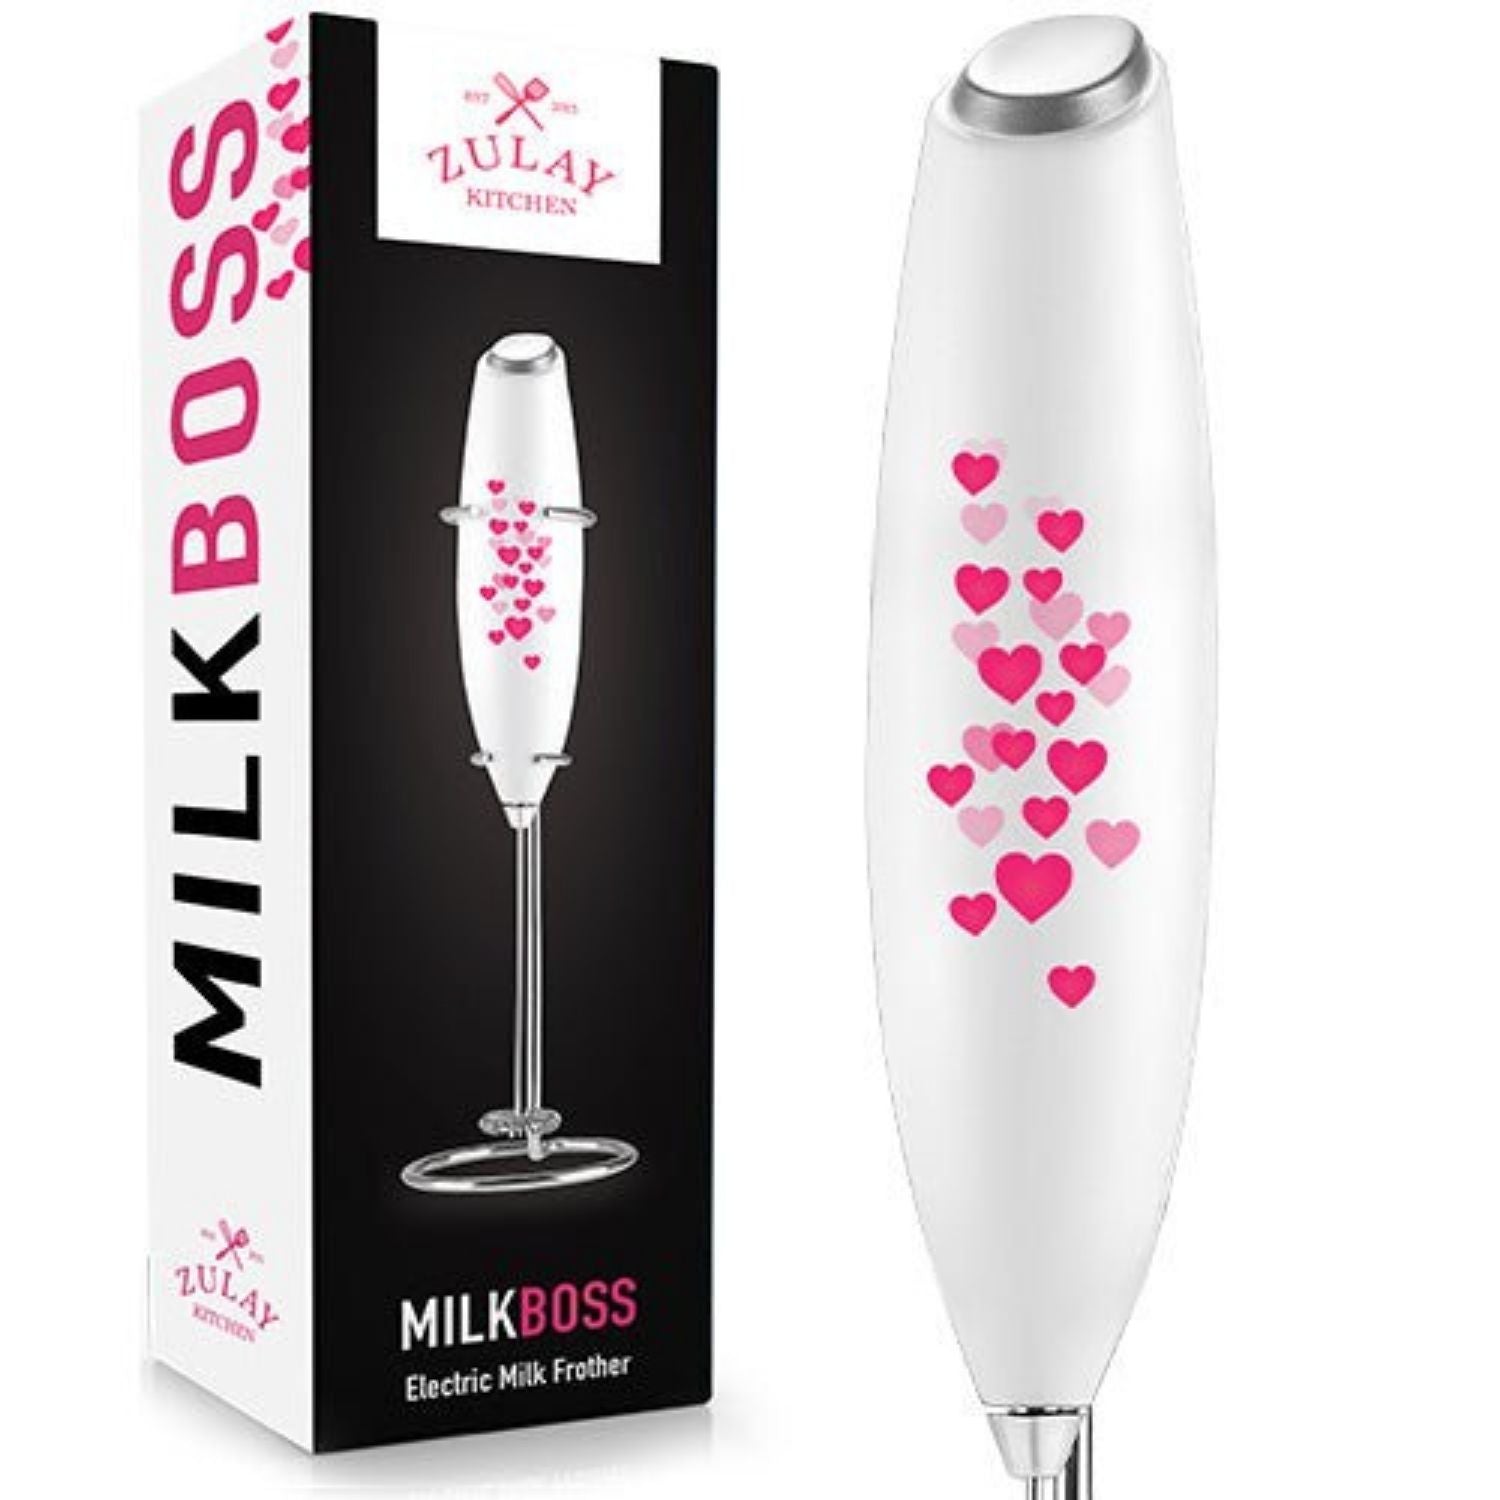 Zulay Kitchen MILK BOSS Milk Frother With Stand - Exec White with